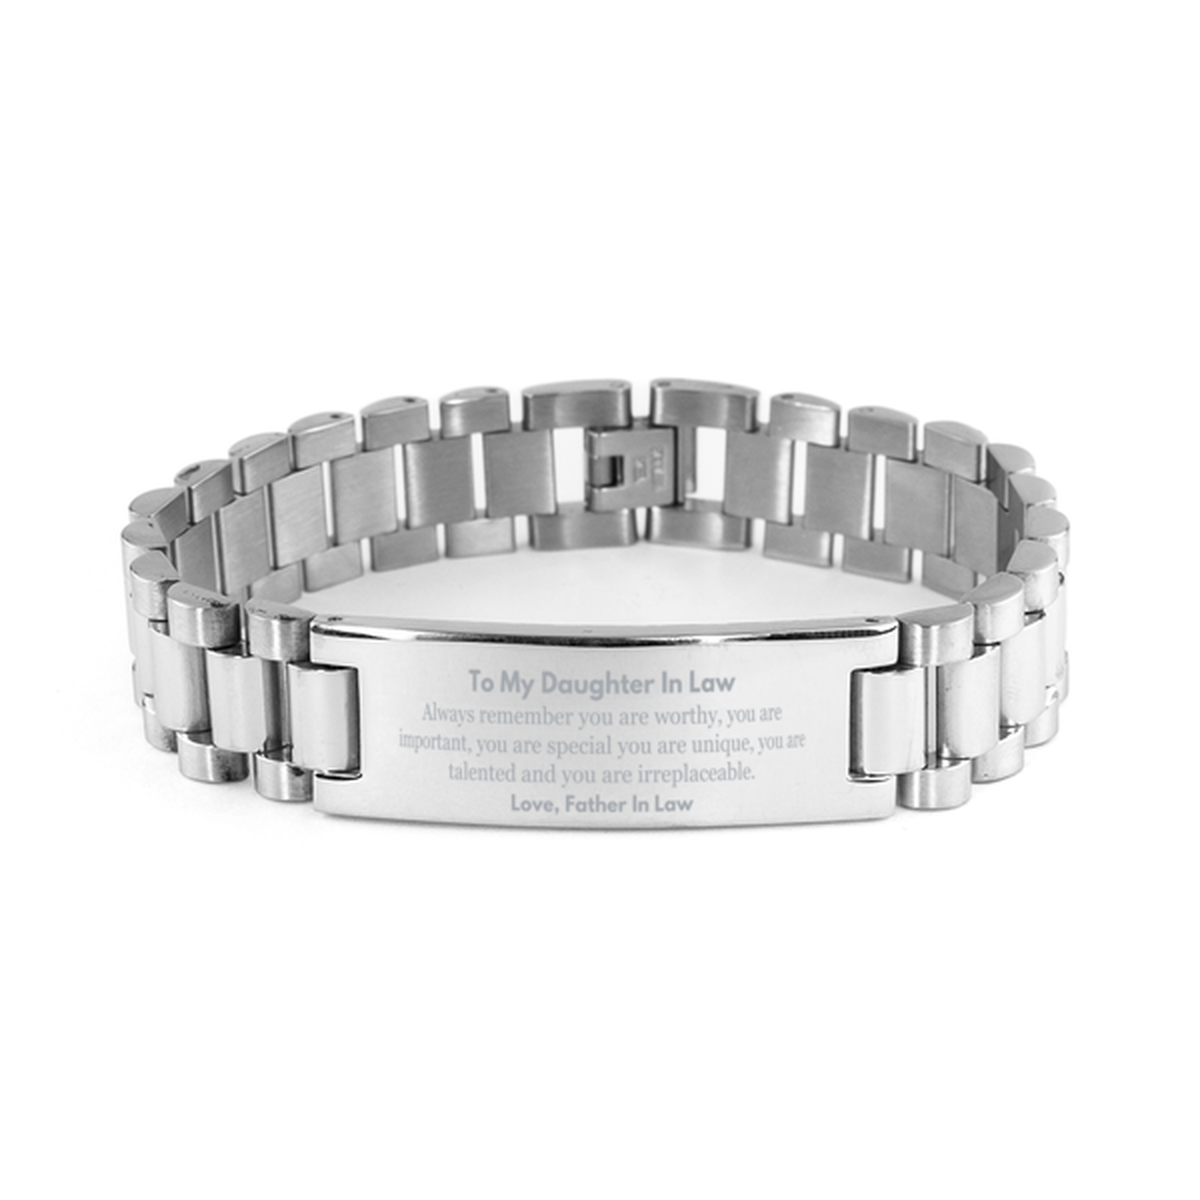 Daughter In Law Birthday Gifts from Father In Law, Inspirational Ladder Stainless Steel Bracelet for Daughter In Law Christmas Graduation Gifts for Daughter In Law Always remember you are worthy, you are important. Love, Father In Law